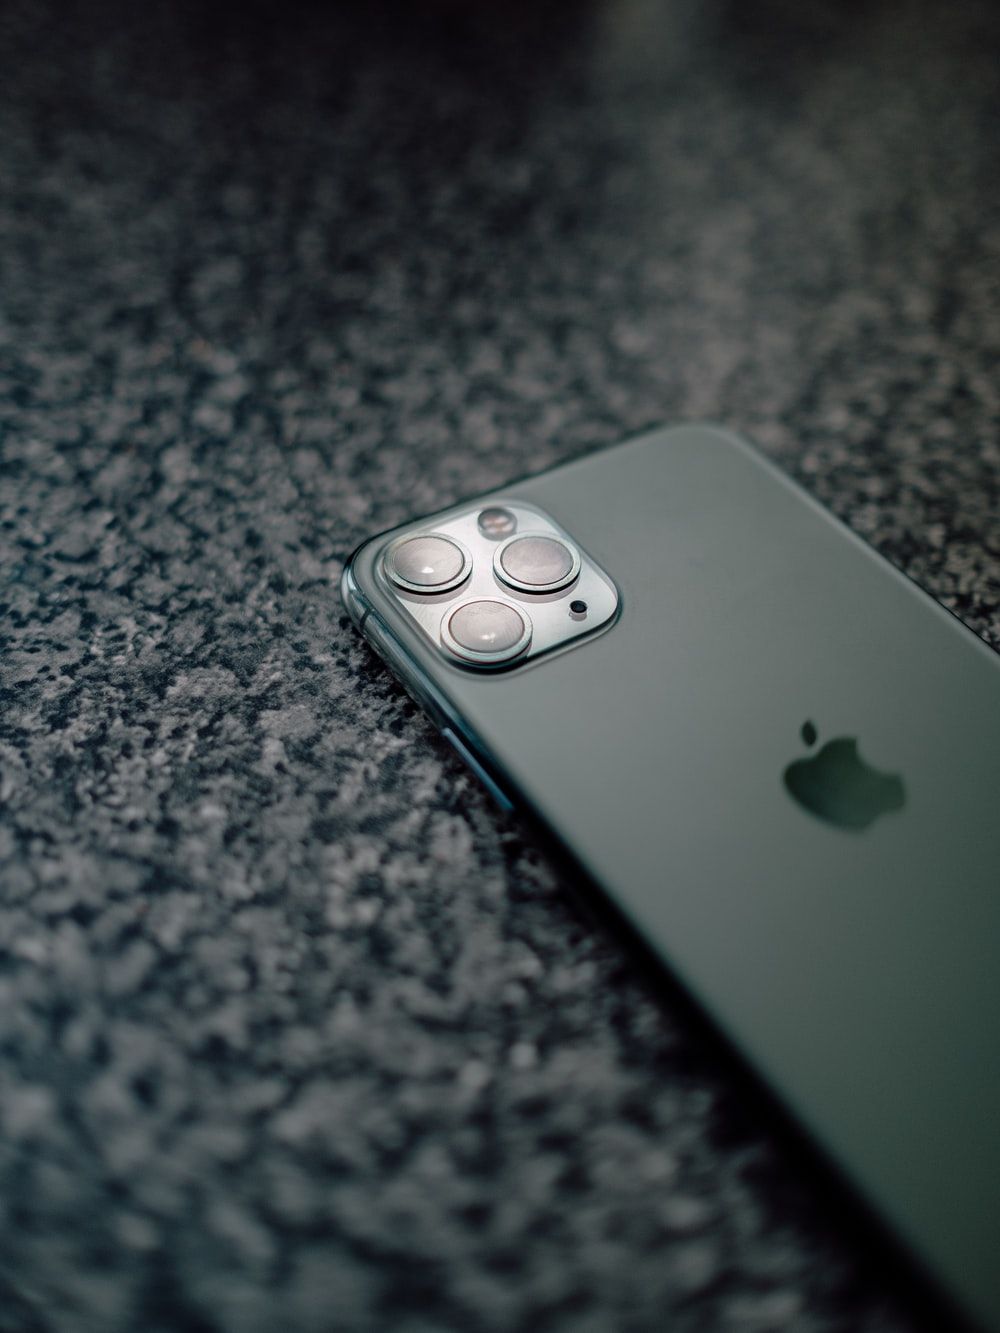 iPhone 11 Pro Midnight Green Picture. Download Free Image